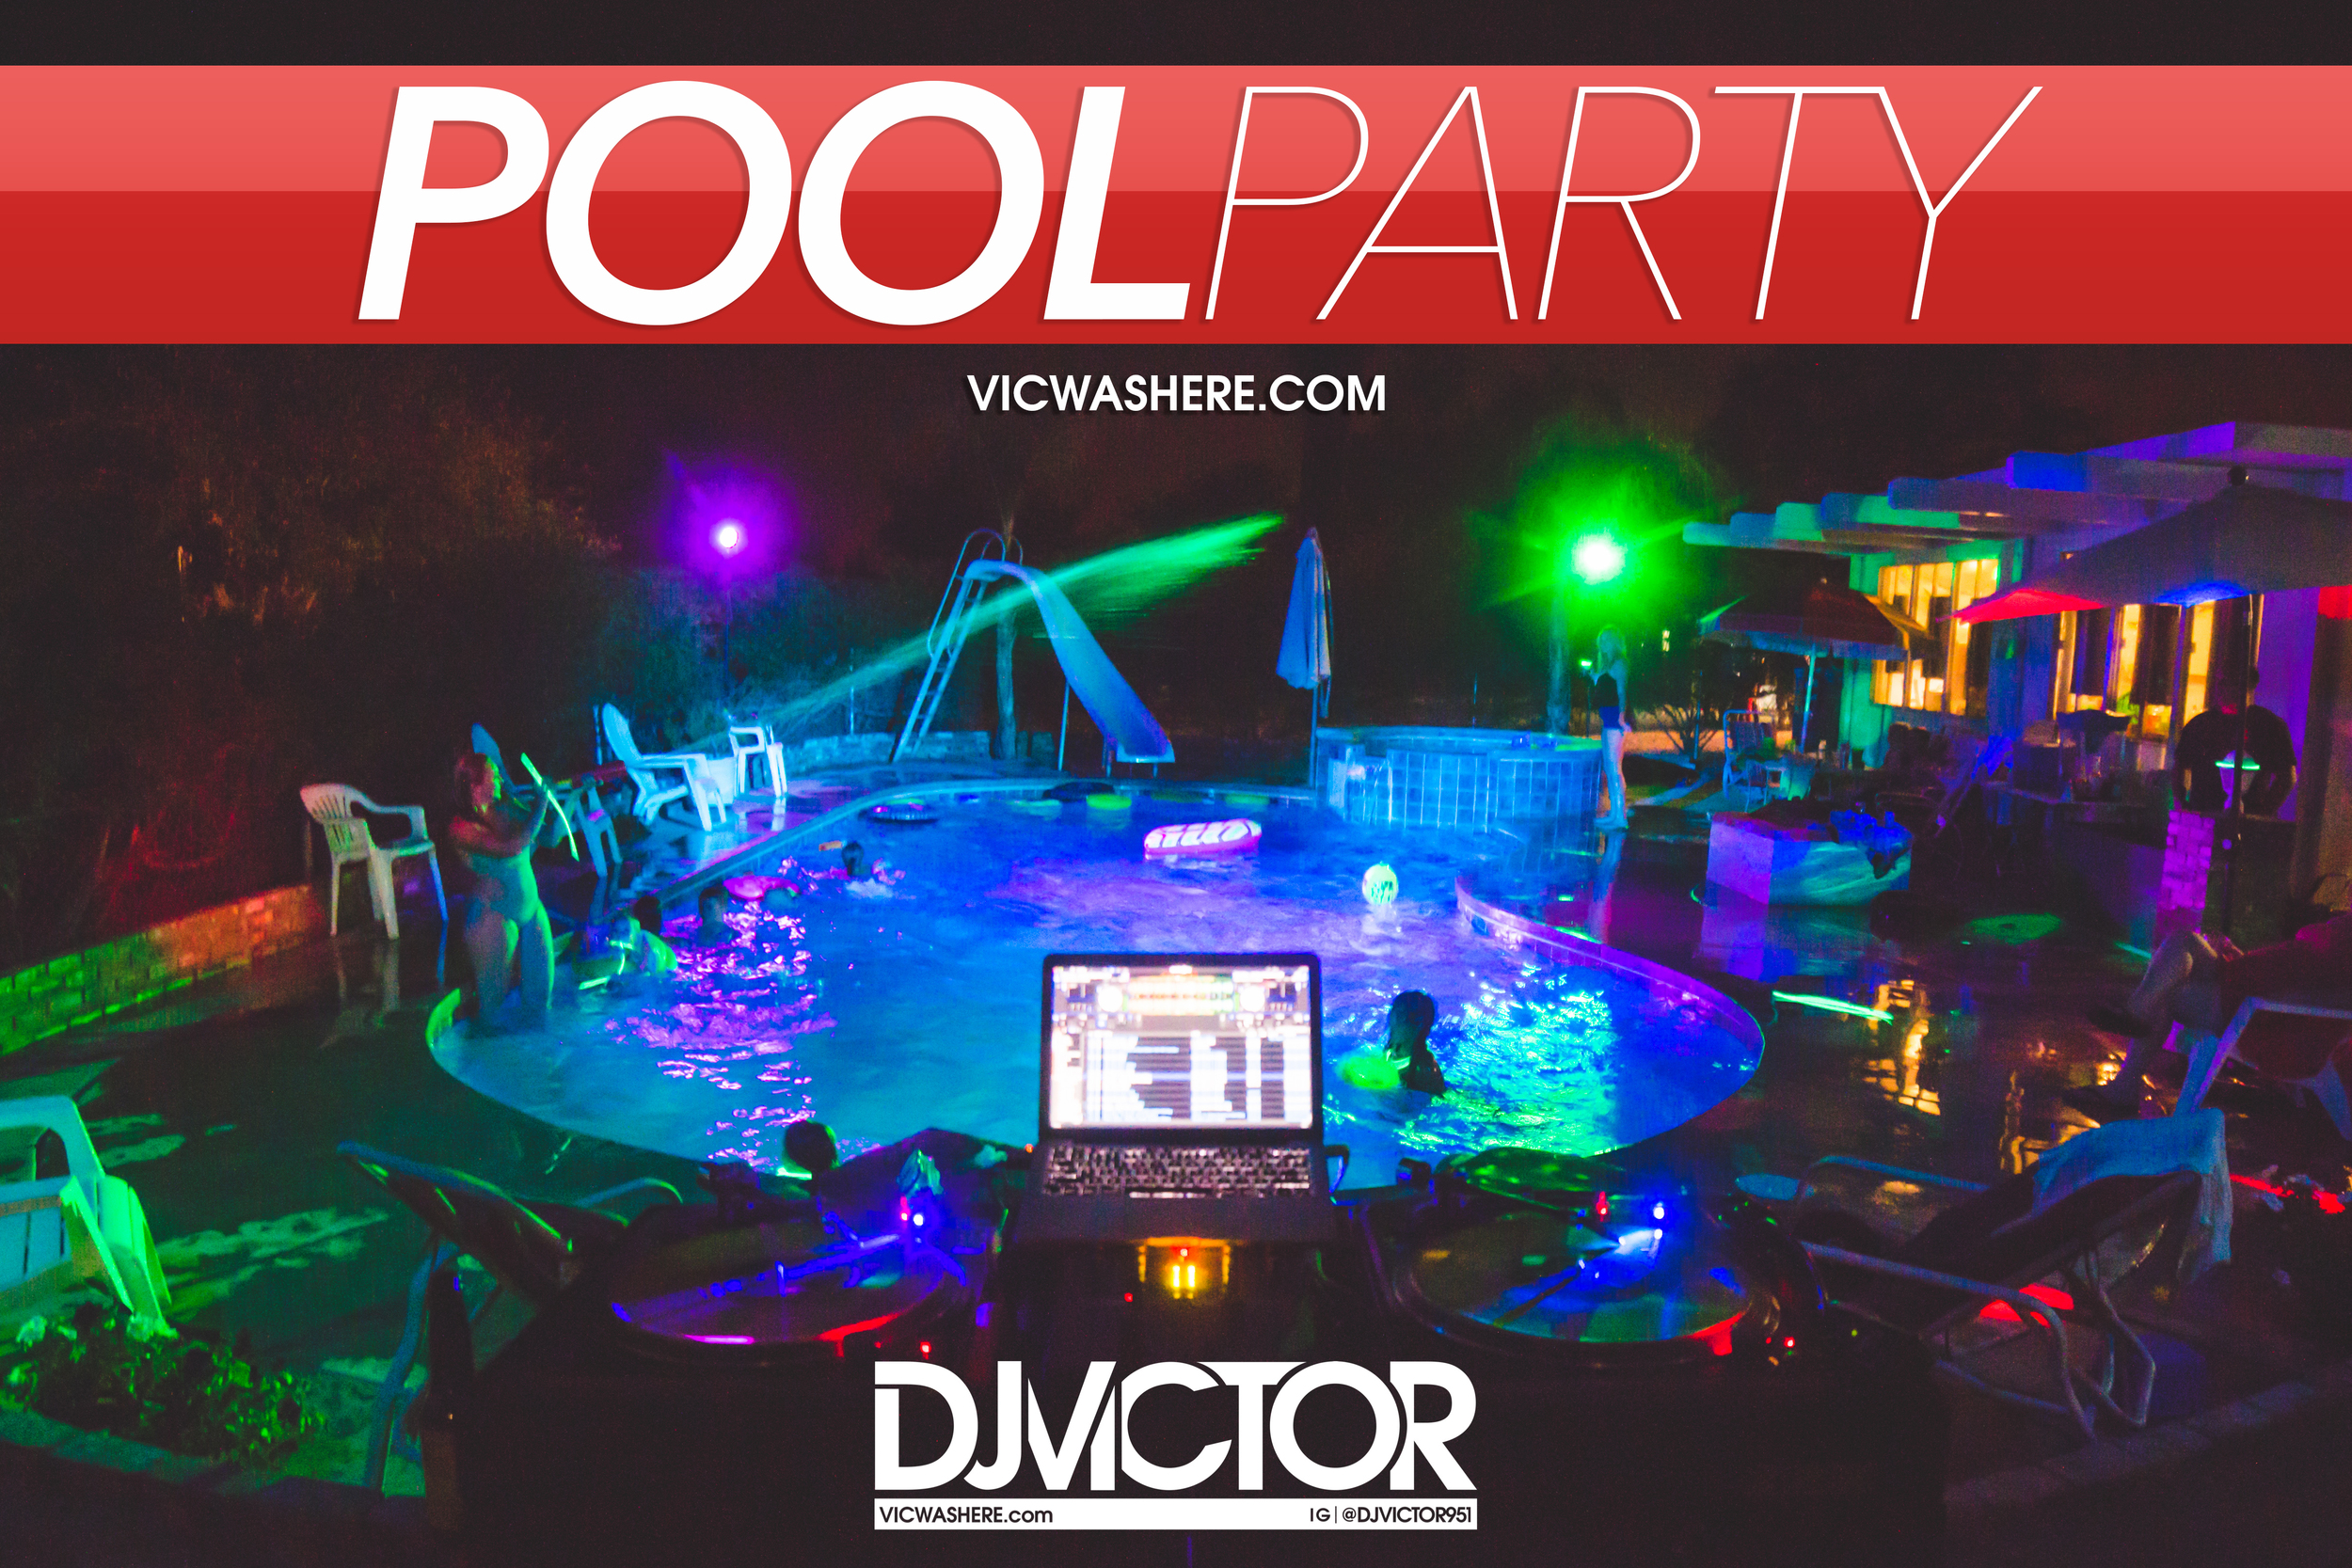 djvictor pool party.jpg